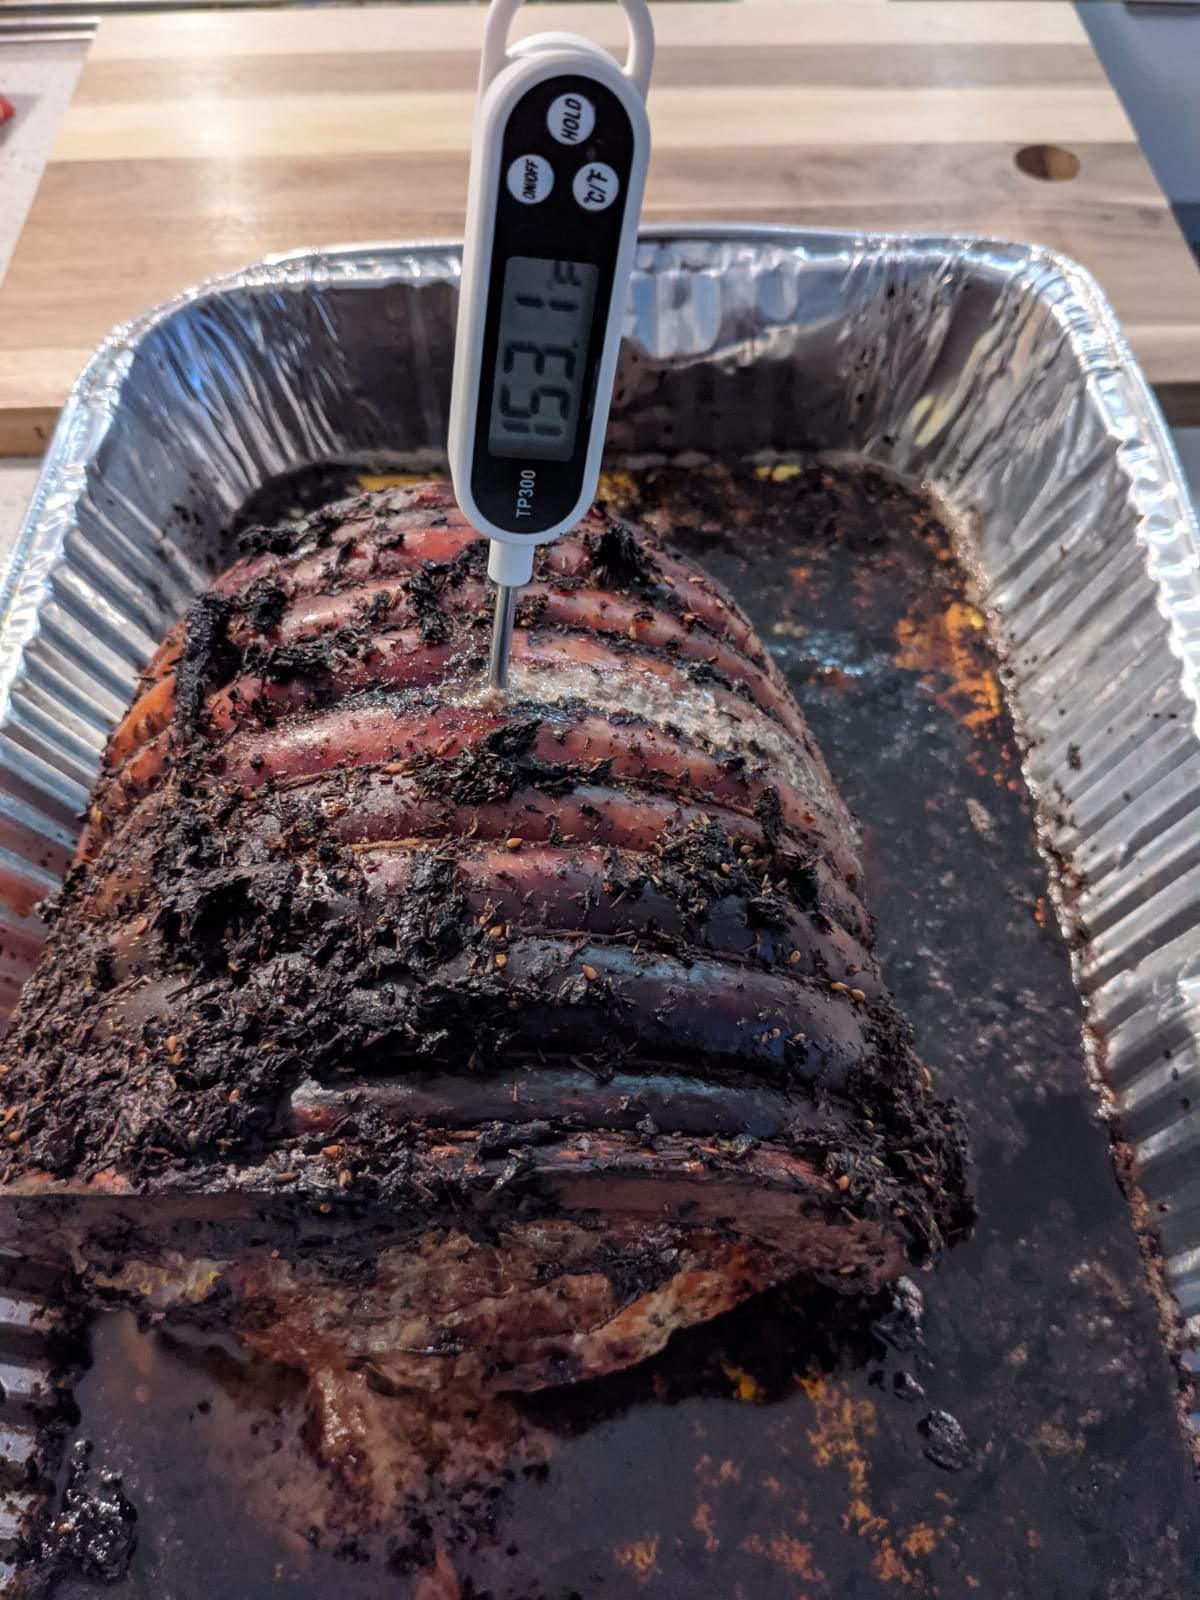 If You *Still* Don't Own A Meat Thermometer, Here are 3 We'd Recommend